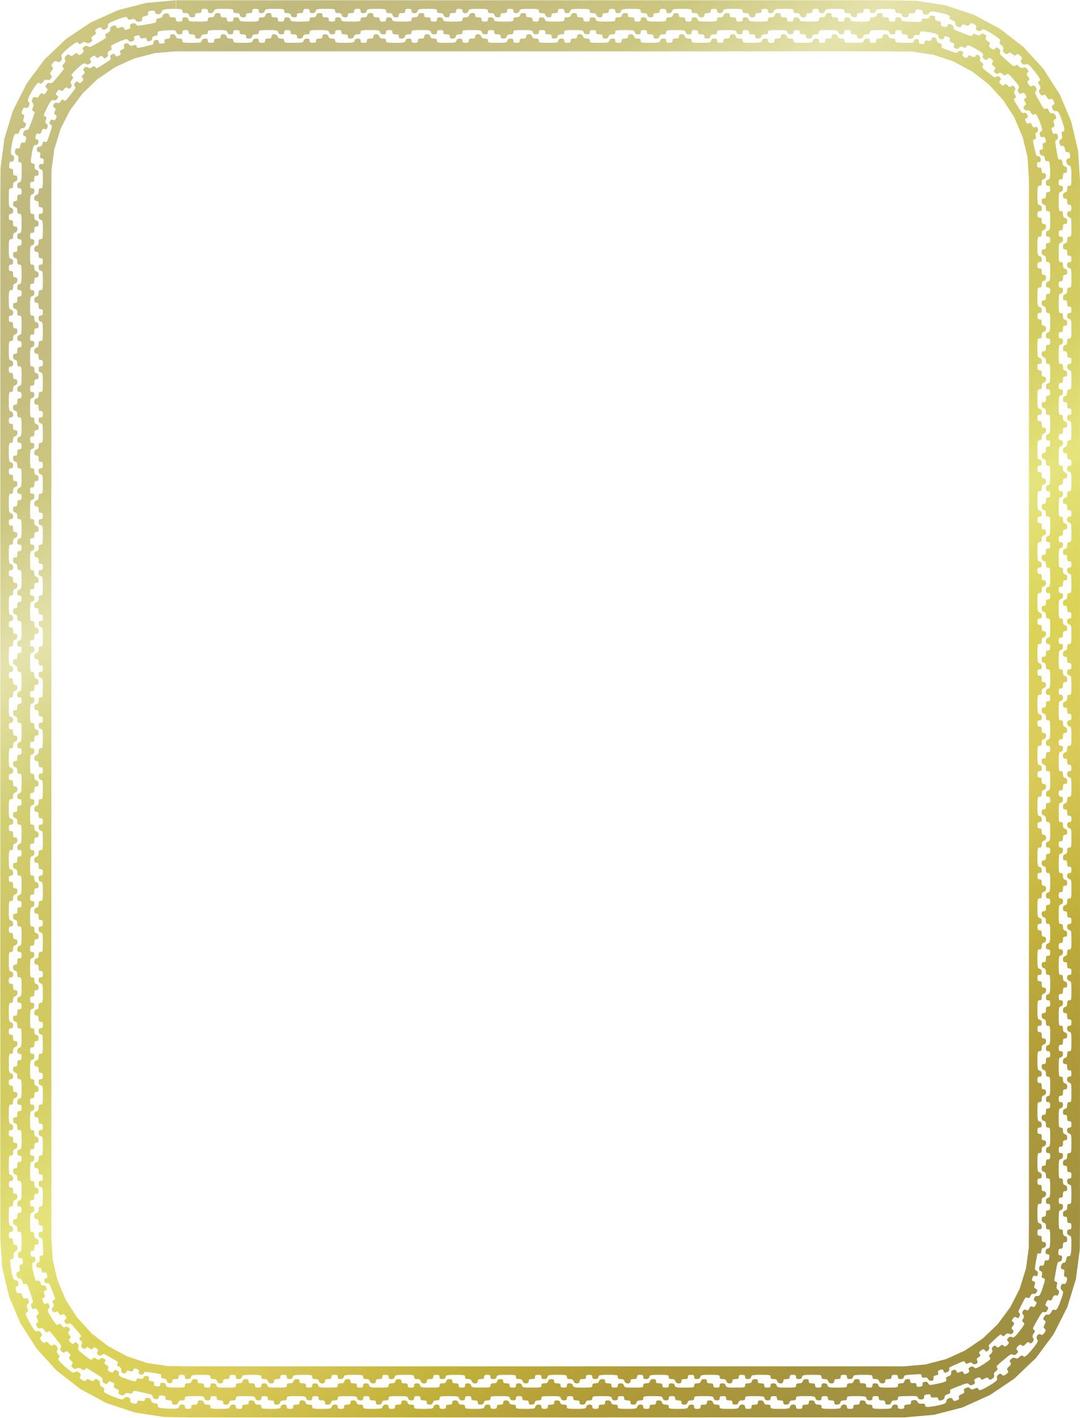 Gold and Yellow Border png transparent